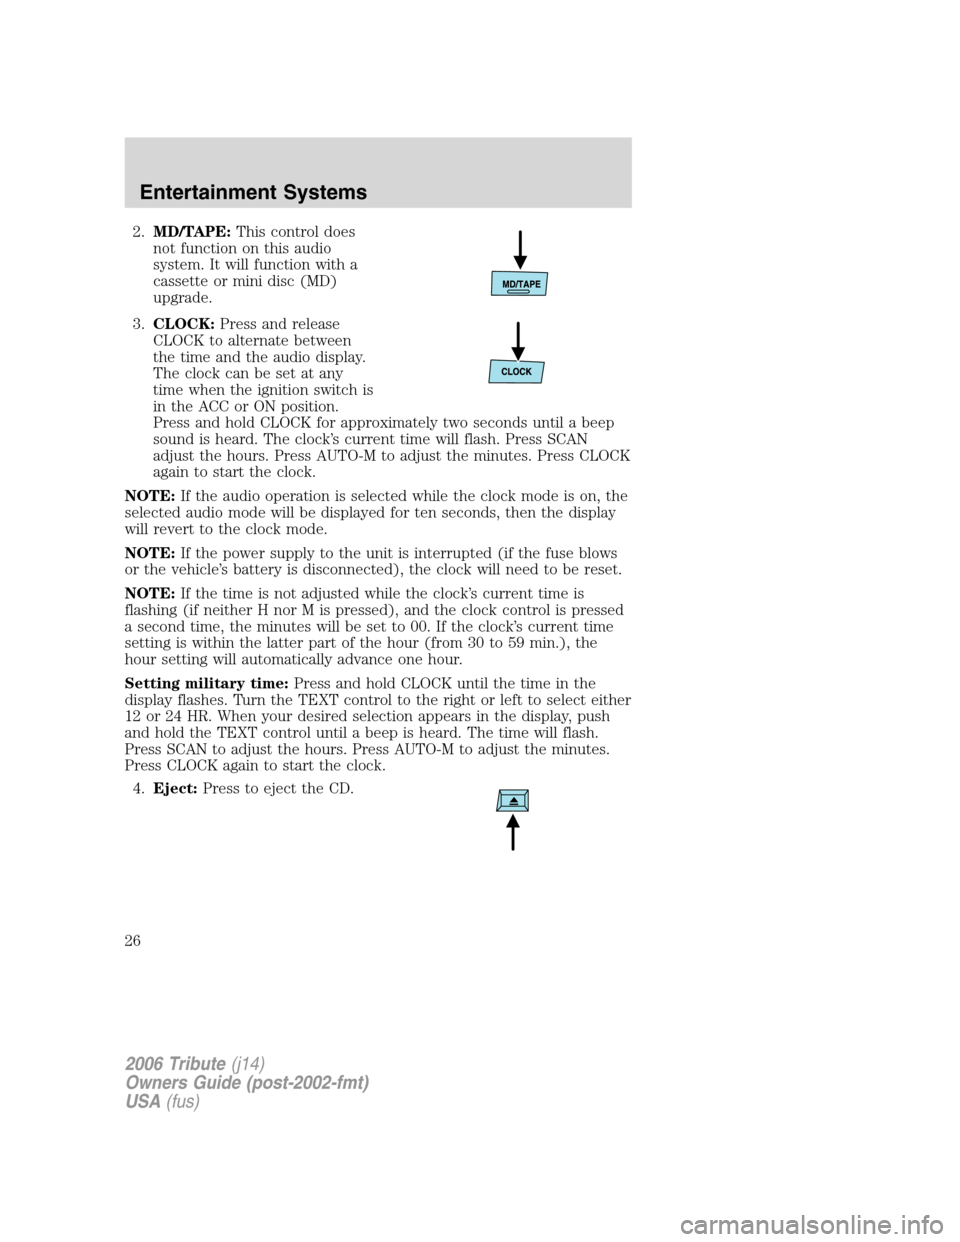 MAZDA MODEL TRIBUTE 2006  Owners Manual (in English) 
2.MD/TAPE: This control does
not function on this audio
system. It will function with a
cassette or mini disc (MD)
upgrade.
3. CLOCK: Press and release
CLOCK to alternate between
the time and the aud